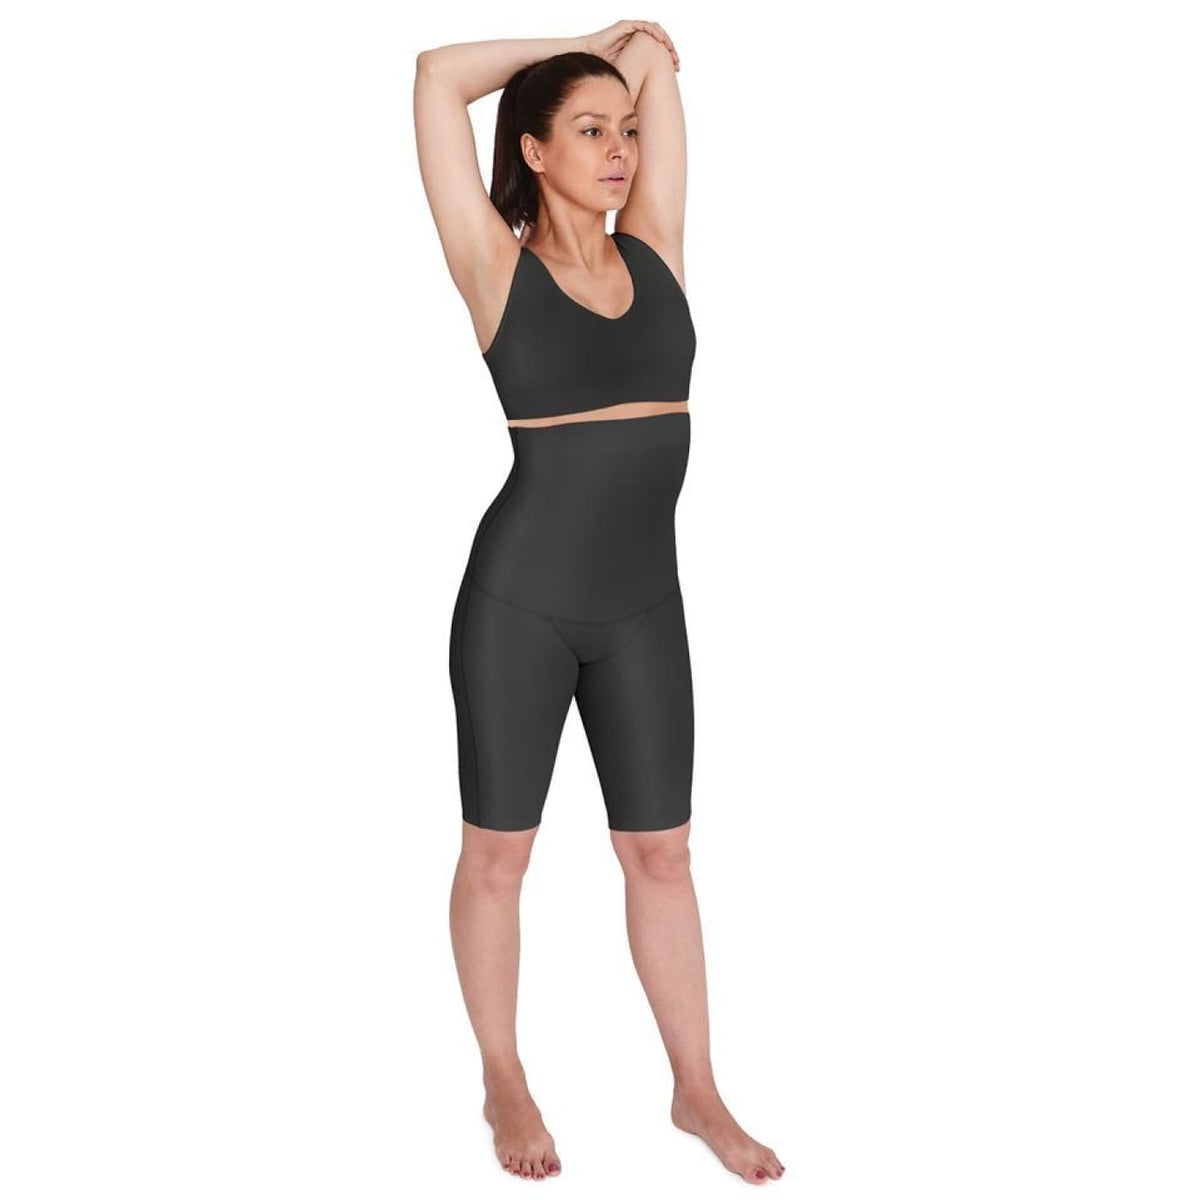 SRC Recovery Shorts - Black M - FOR MUM - MATERNITY SUPPORT GARMENTS (PRE/POST)